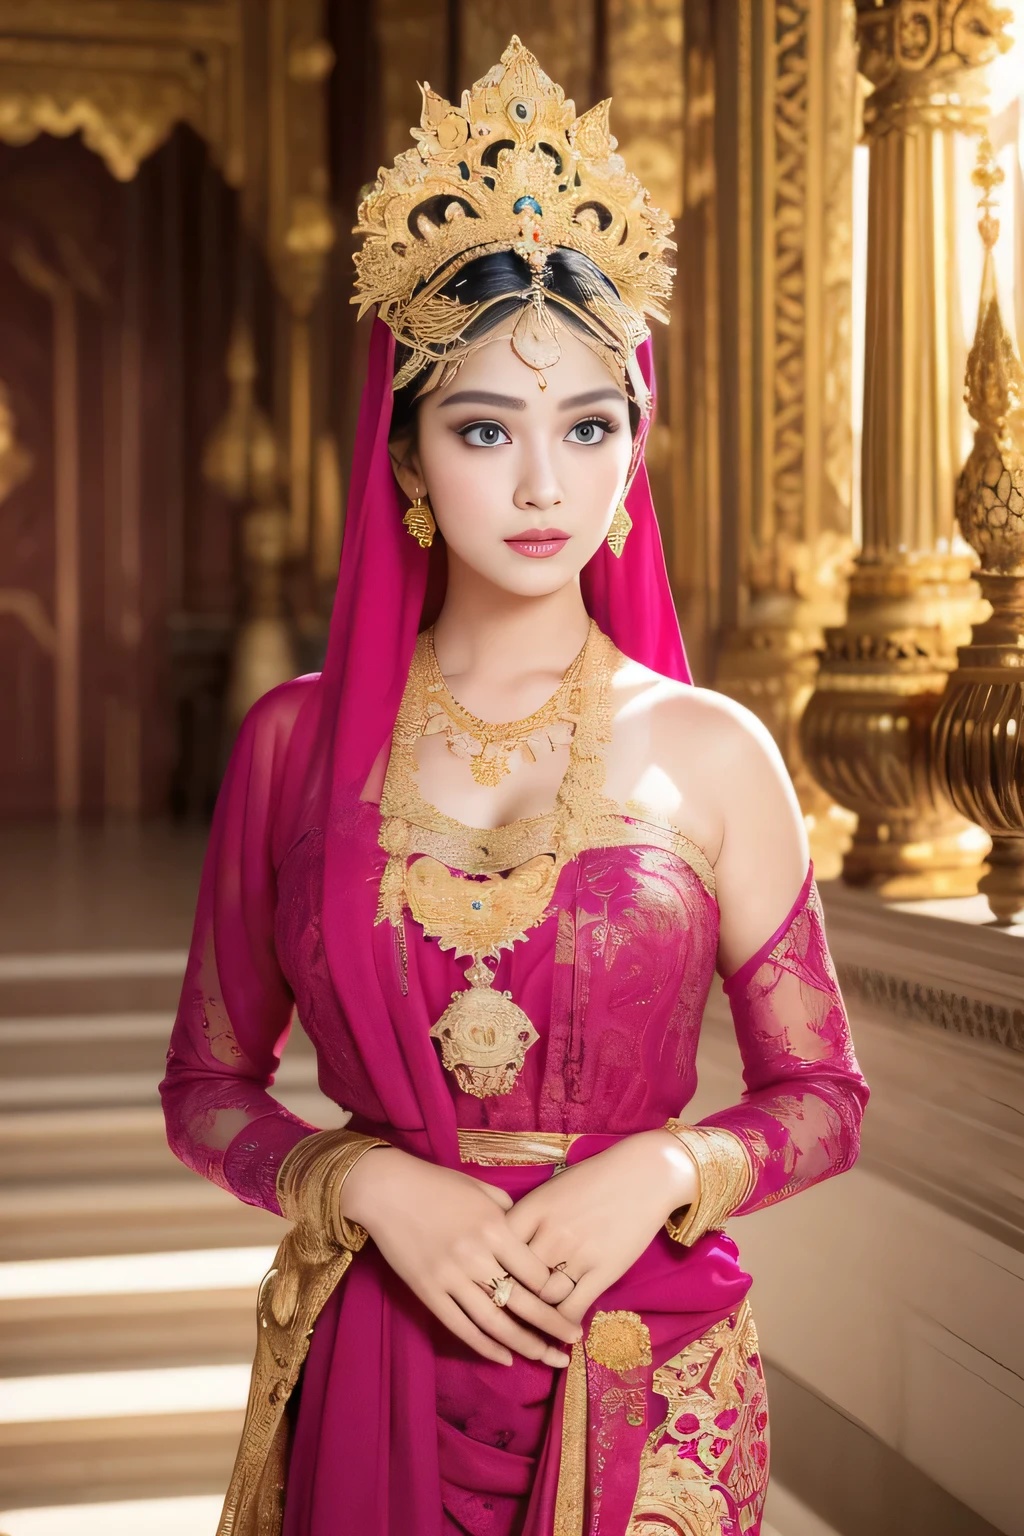 (best quality,4k,highres,masterpiece:1.2),ultra-detailed,realistic:1.37,beautiful and regal Javanese queen with hijab,dark and luxurious palace backdrop,beautiful detailed eyes and face,long eyelashes,voluptuous and curvy figure,exquisite jewelry and accessories,ornate and intricate patterned textiles,dazzling crown and royal attire,golden light illuminating the scene,vibrant and vivid color palette,soft and ethereal lighting,confident and alluring expression,graceful and elegant pose,serene and majestic atmosphere,rich cultural elements and symbols,meticulously captured body contours,subtle and tasteful sensuality,endless attention to every detail,romantic and dreamlike ambiance,artistic interpretation of beauty,stylish and sophisticated composition.